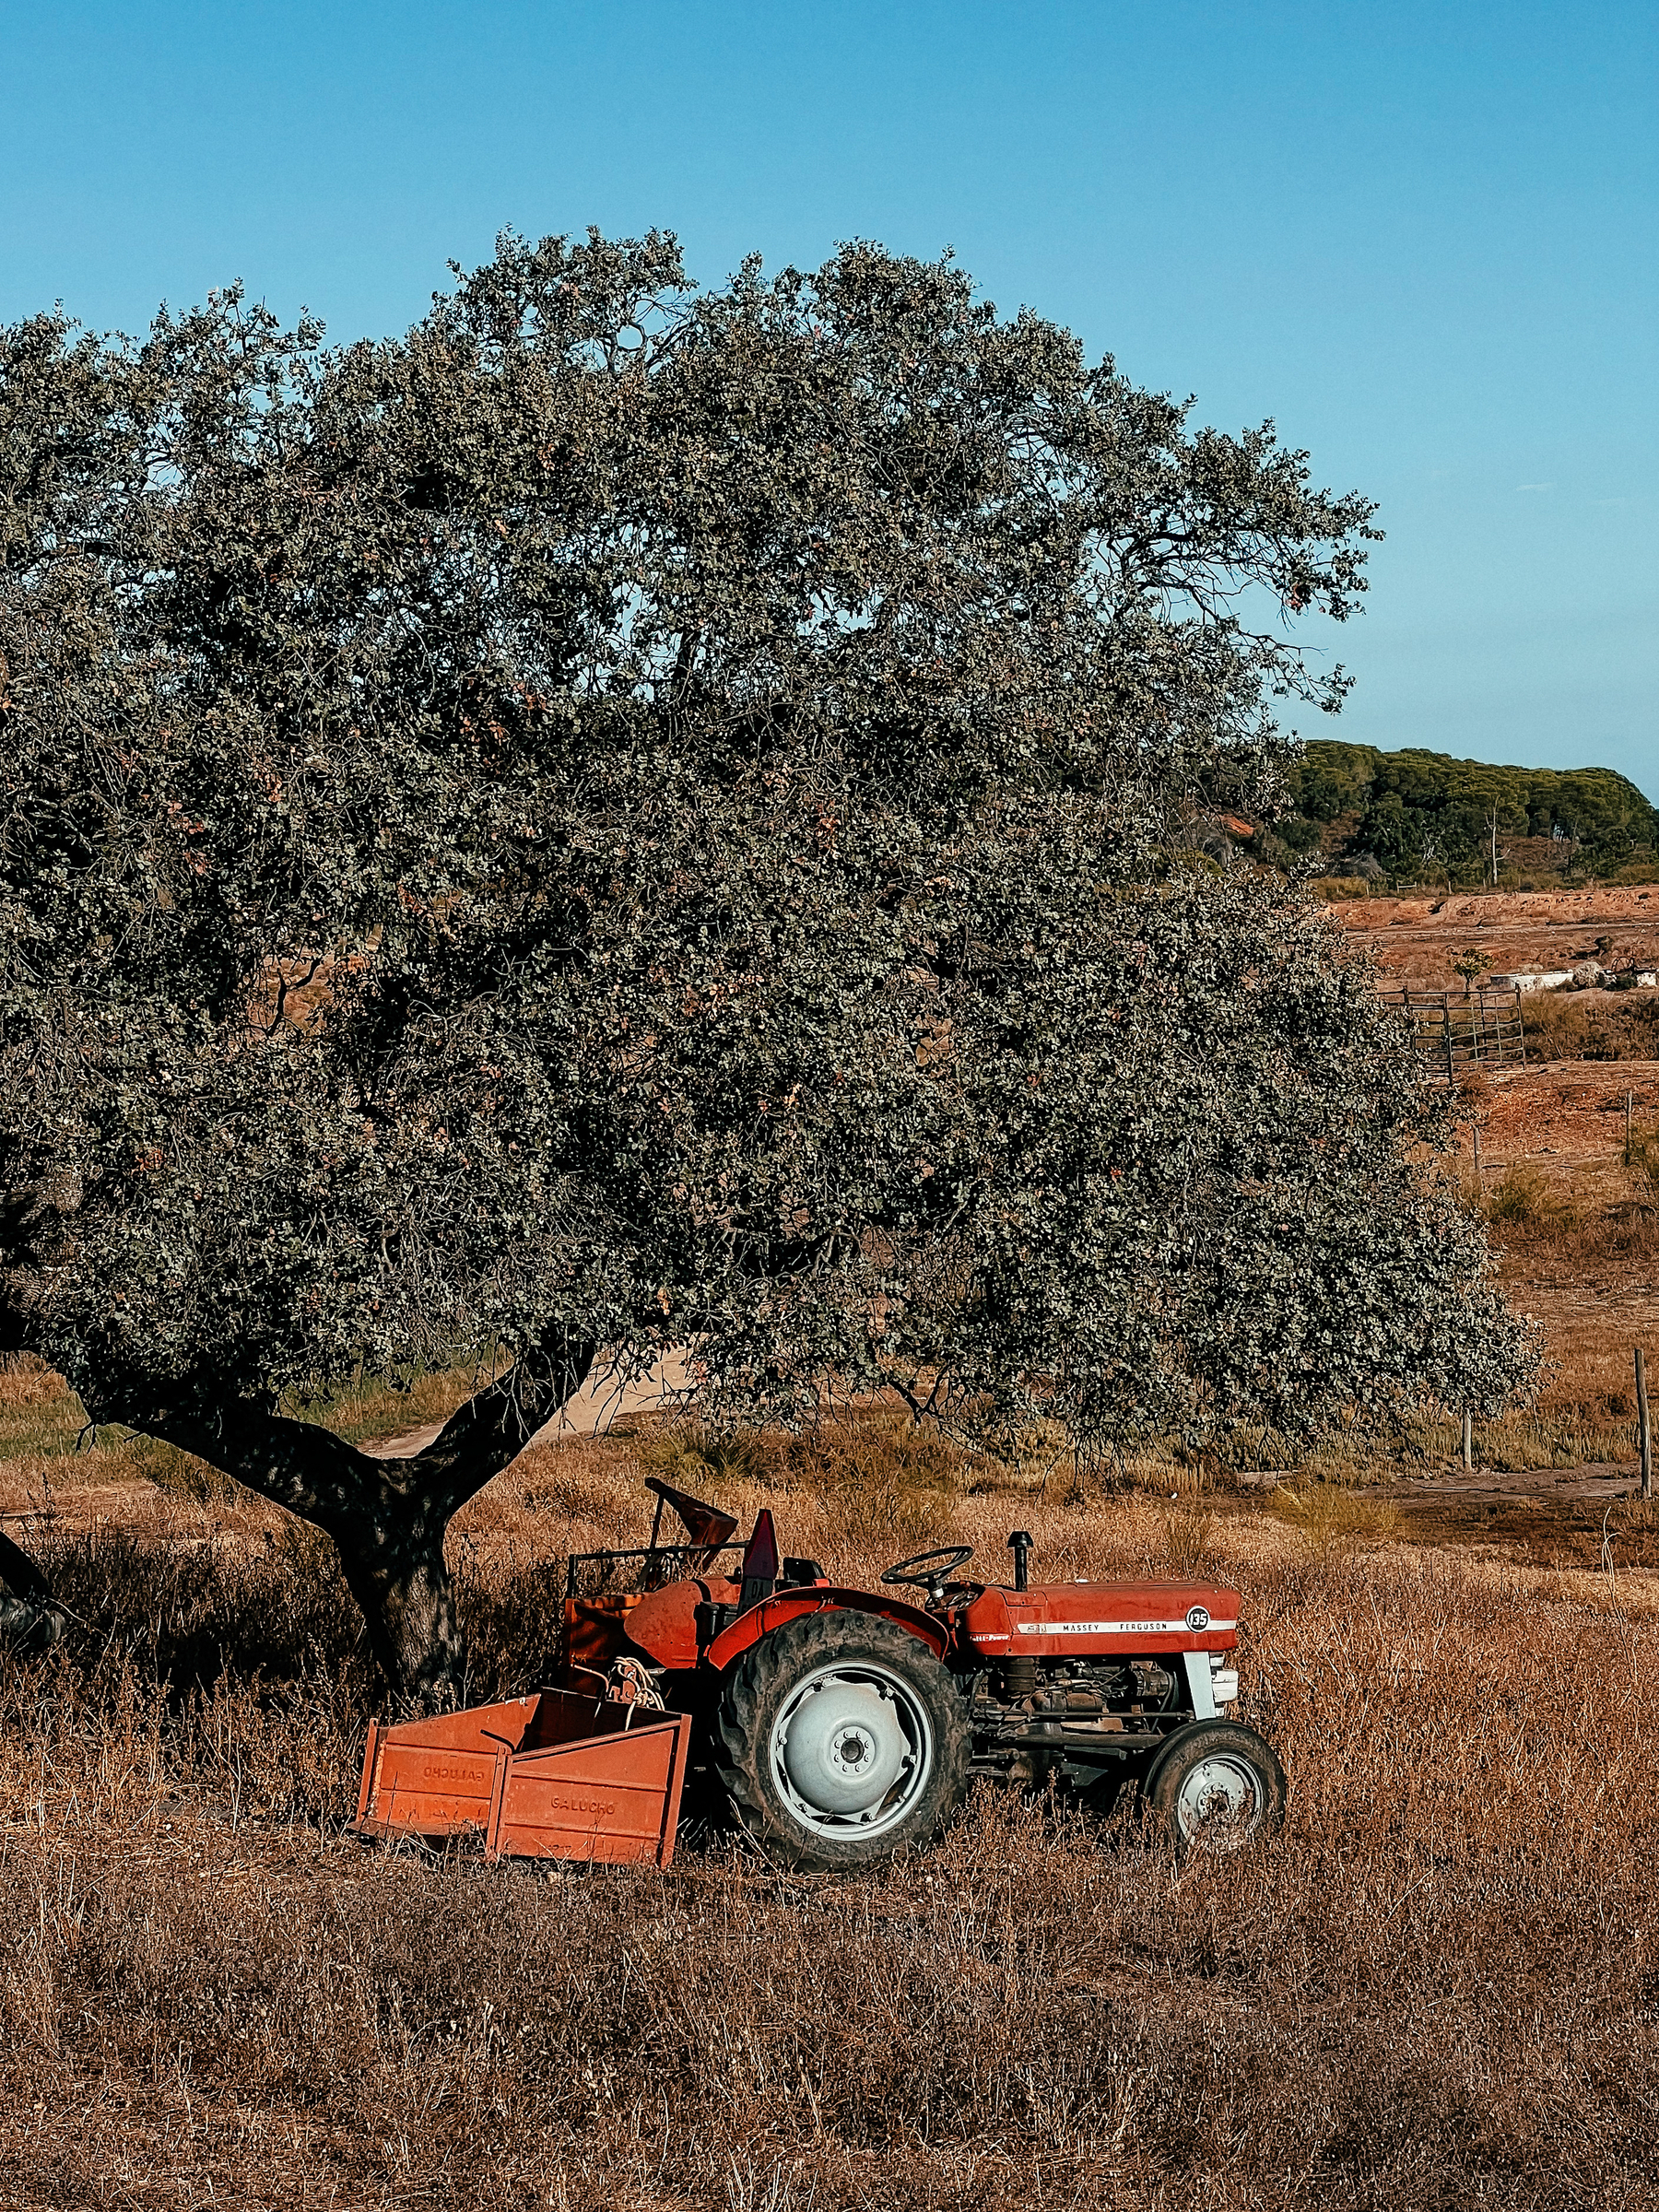 A tractor sits under a tree